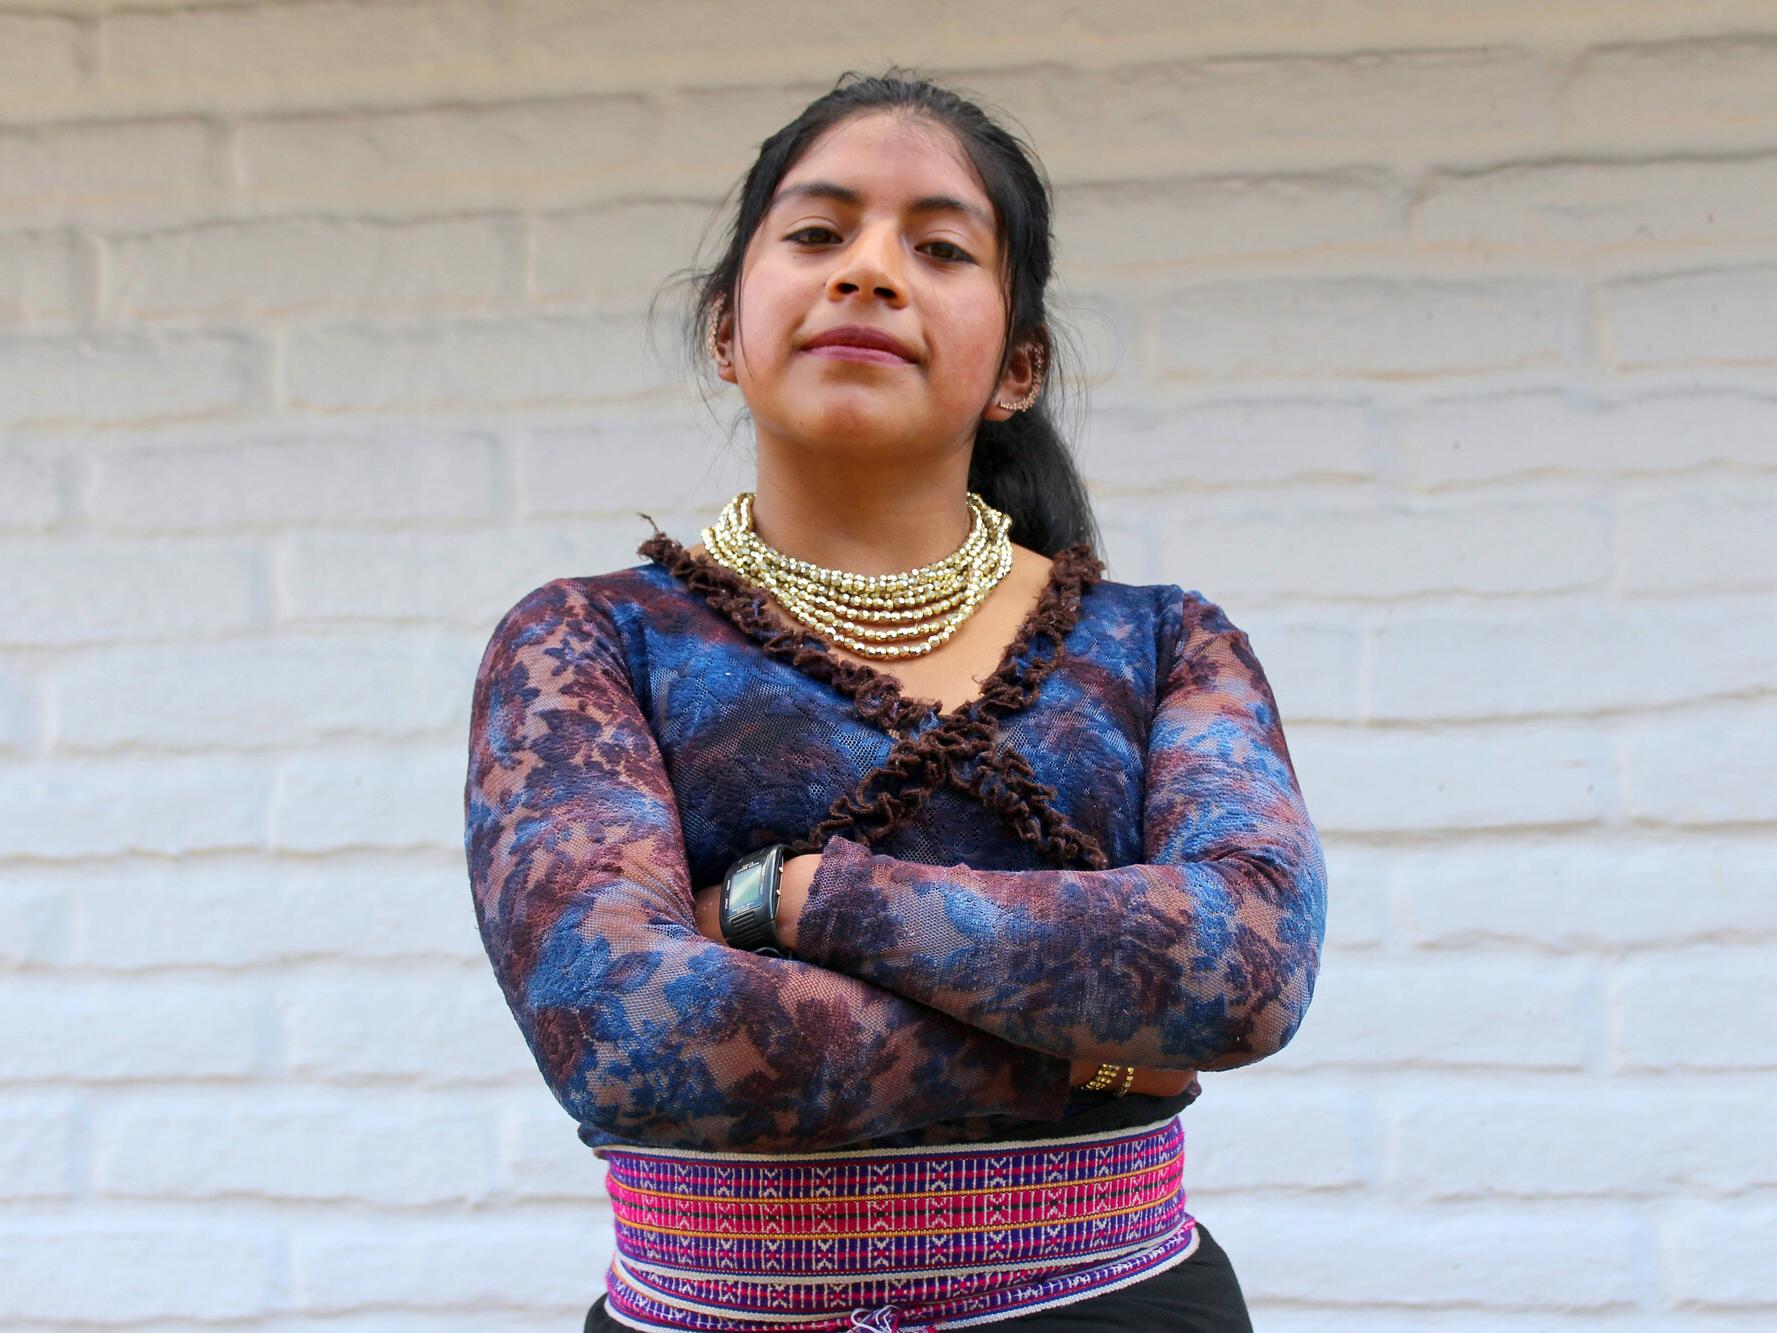 Yadira, 18, is a young activist who is passionate about girls' rights and lives in Ecuador.  